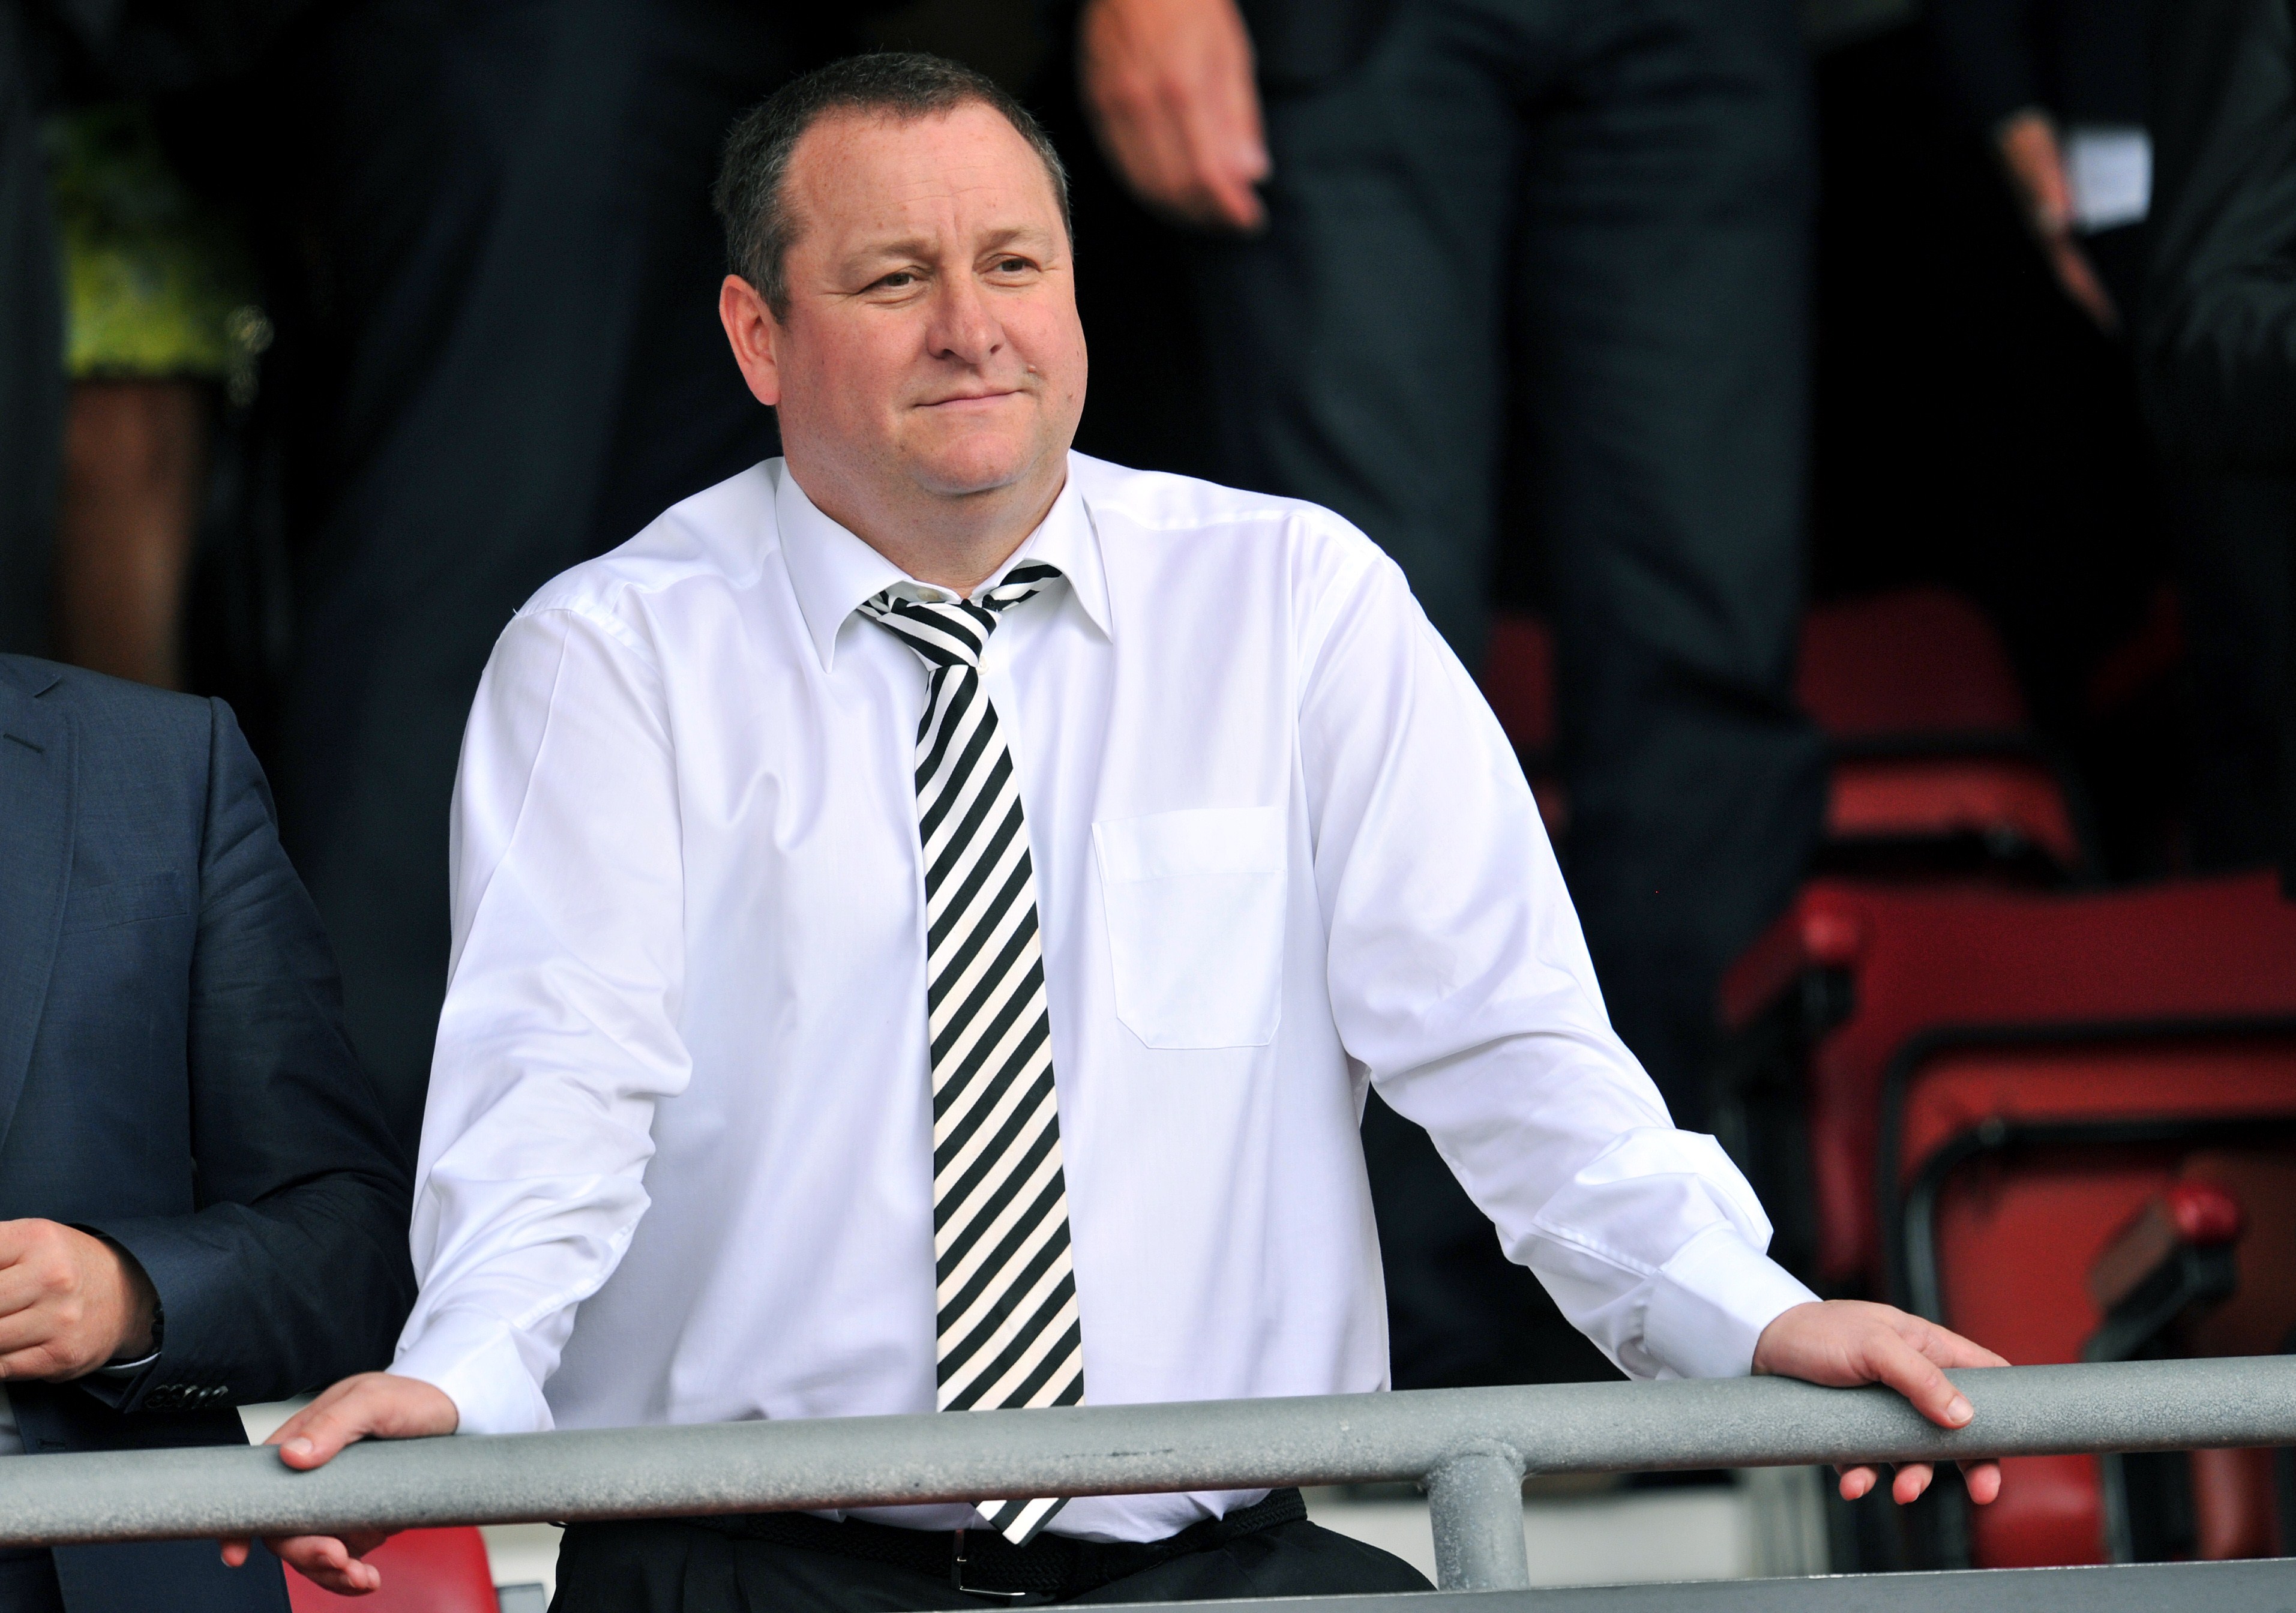 Mike Ashley had hit out at the JD Sports-Footasylum merger